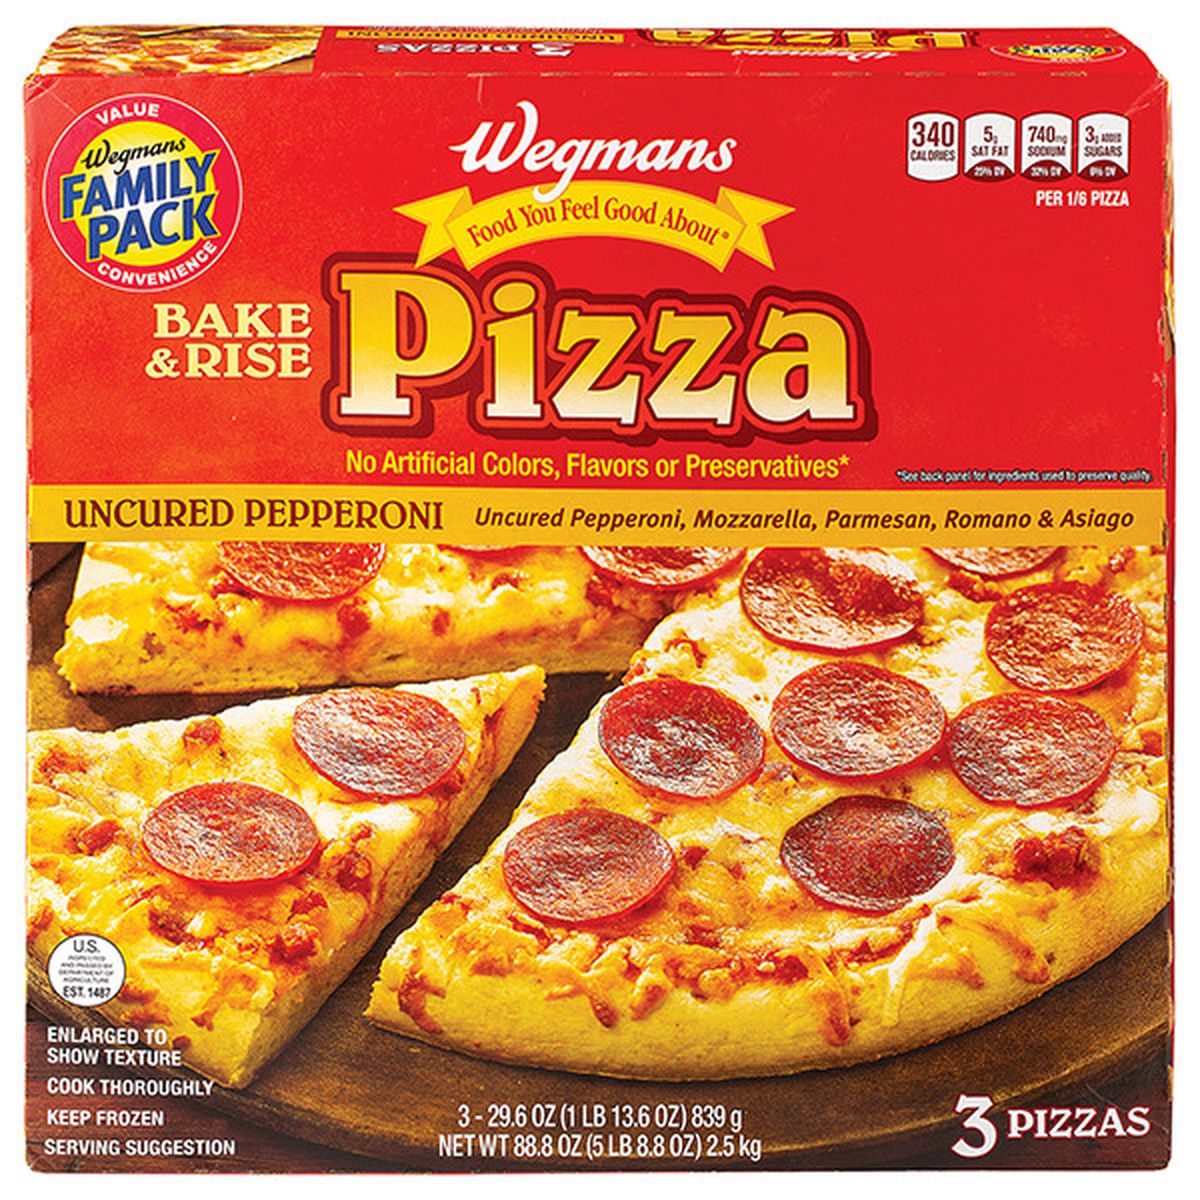 Calories in Wegmans Bake and Rise Uncured Pepperoni Frozen Pizza, FAMILY PACK